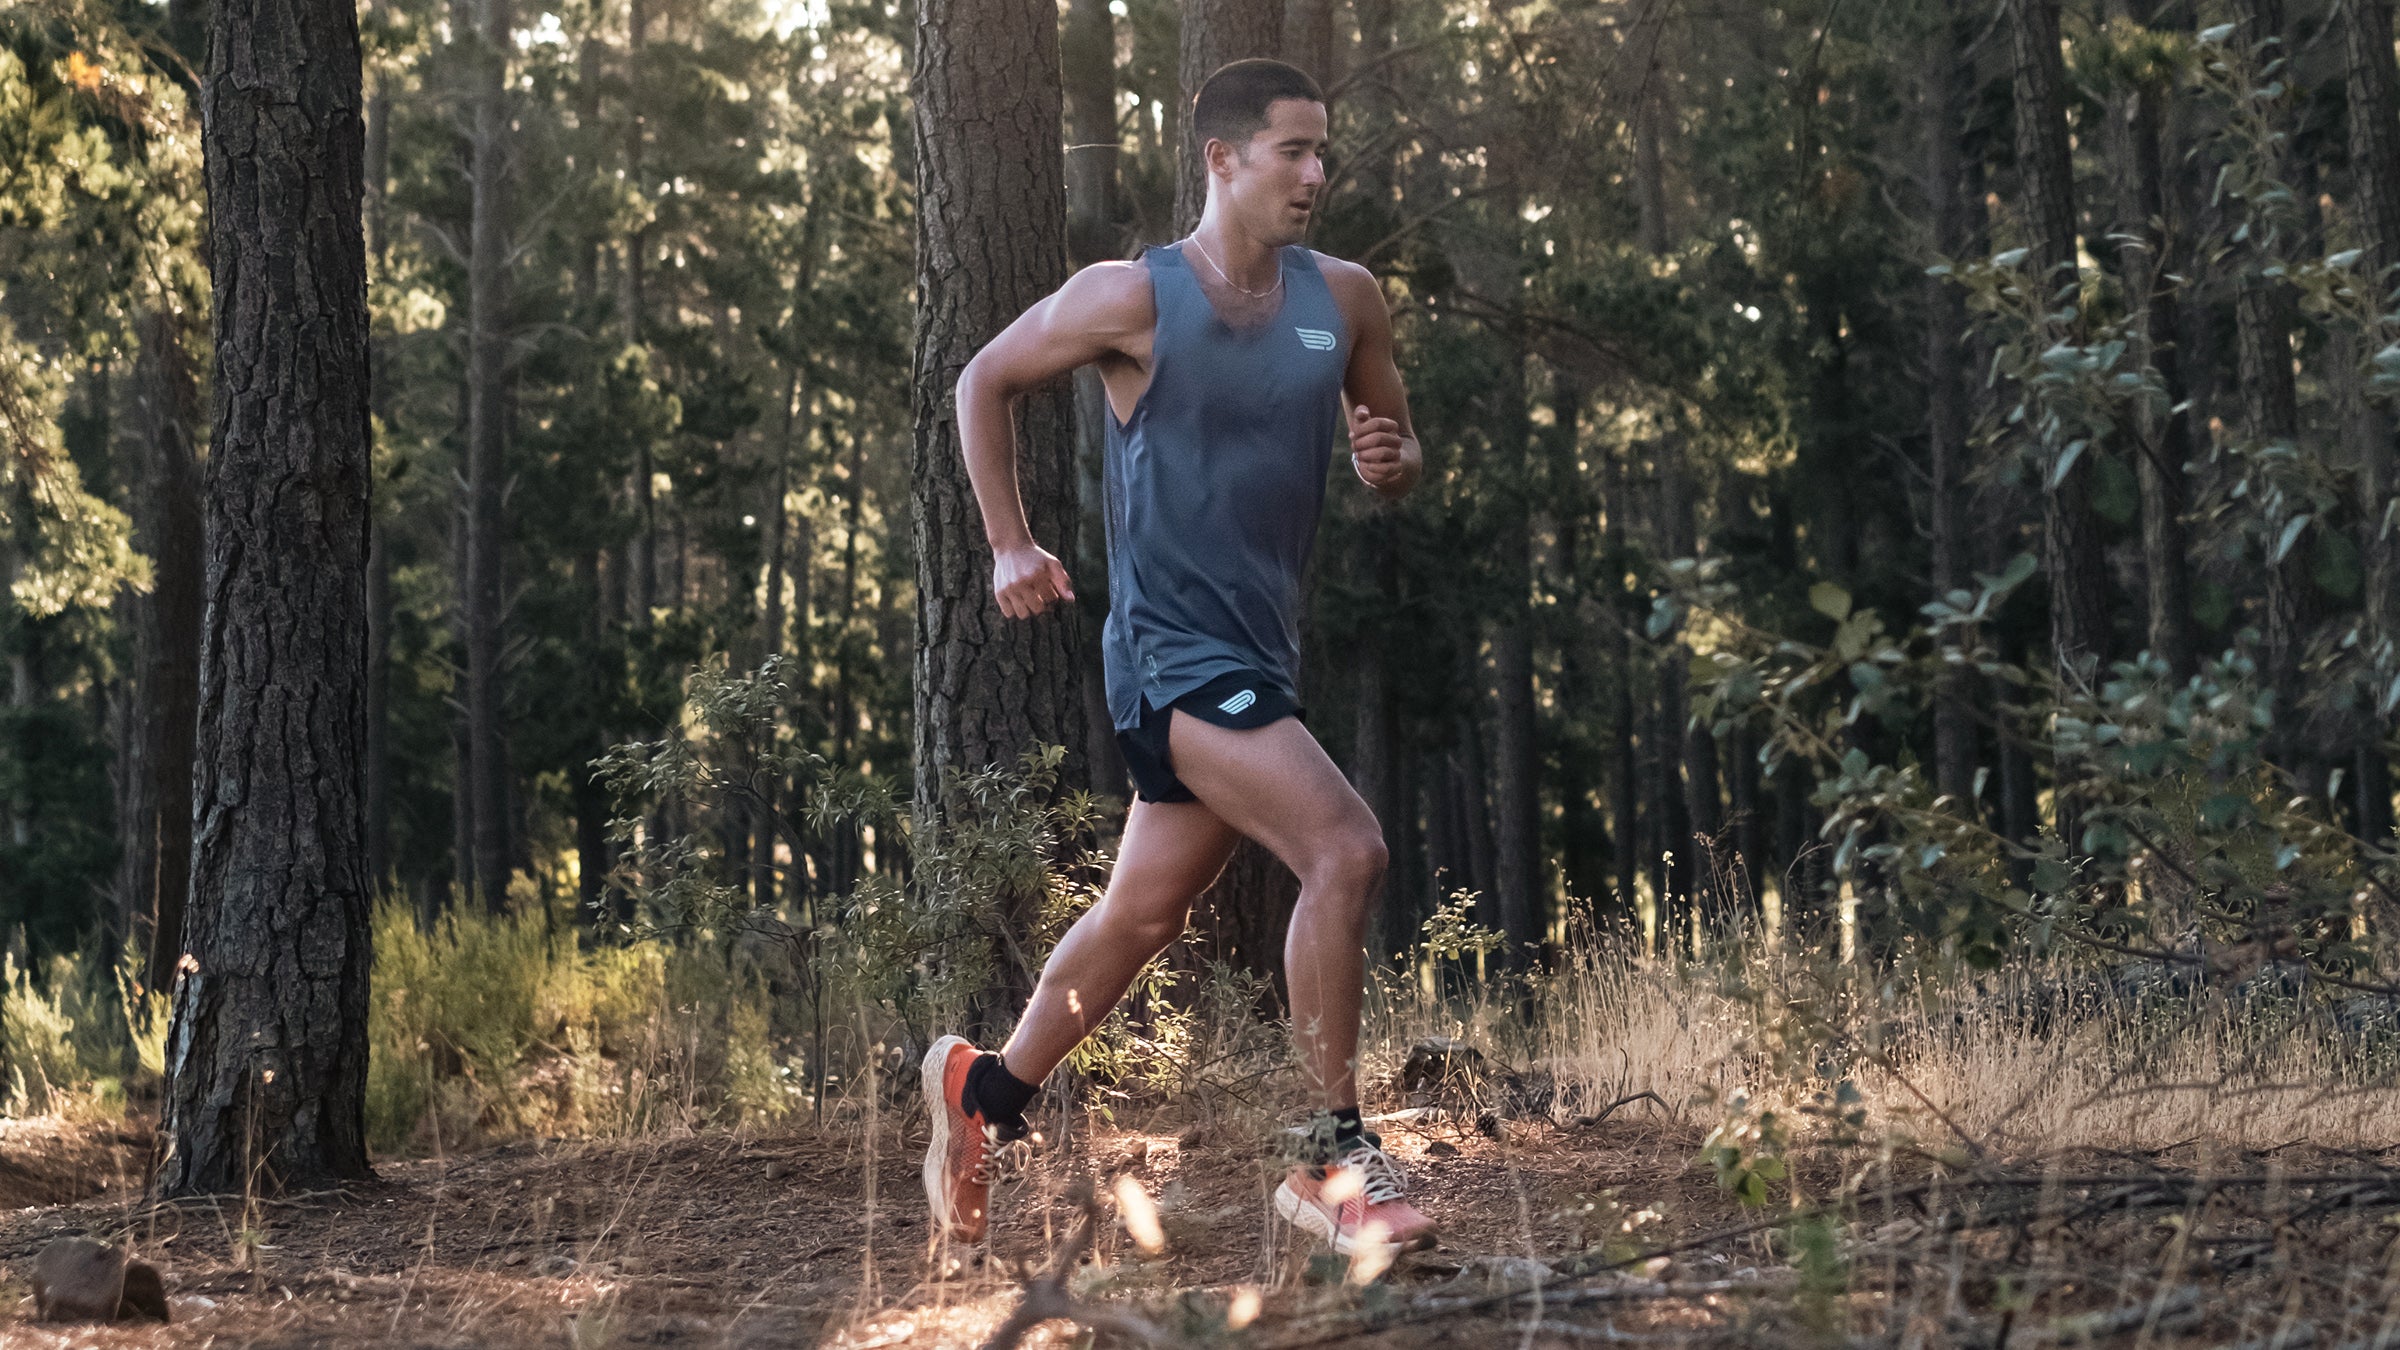 The Best Summer Running Gear Made of Recycled Materials